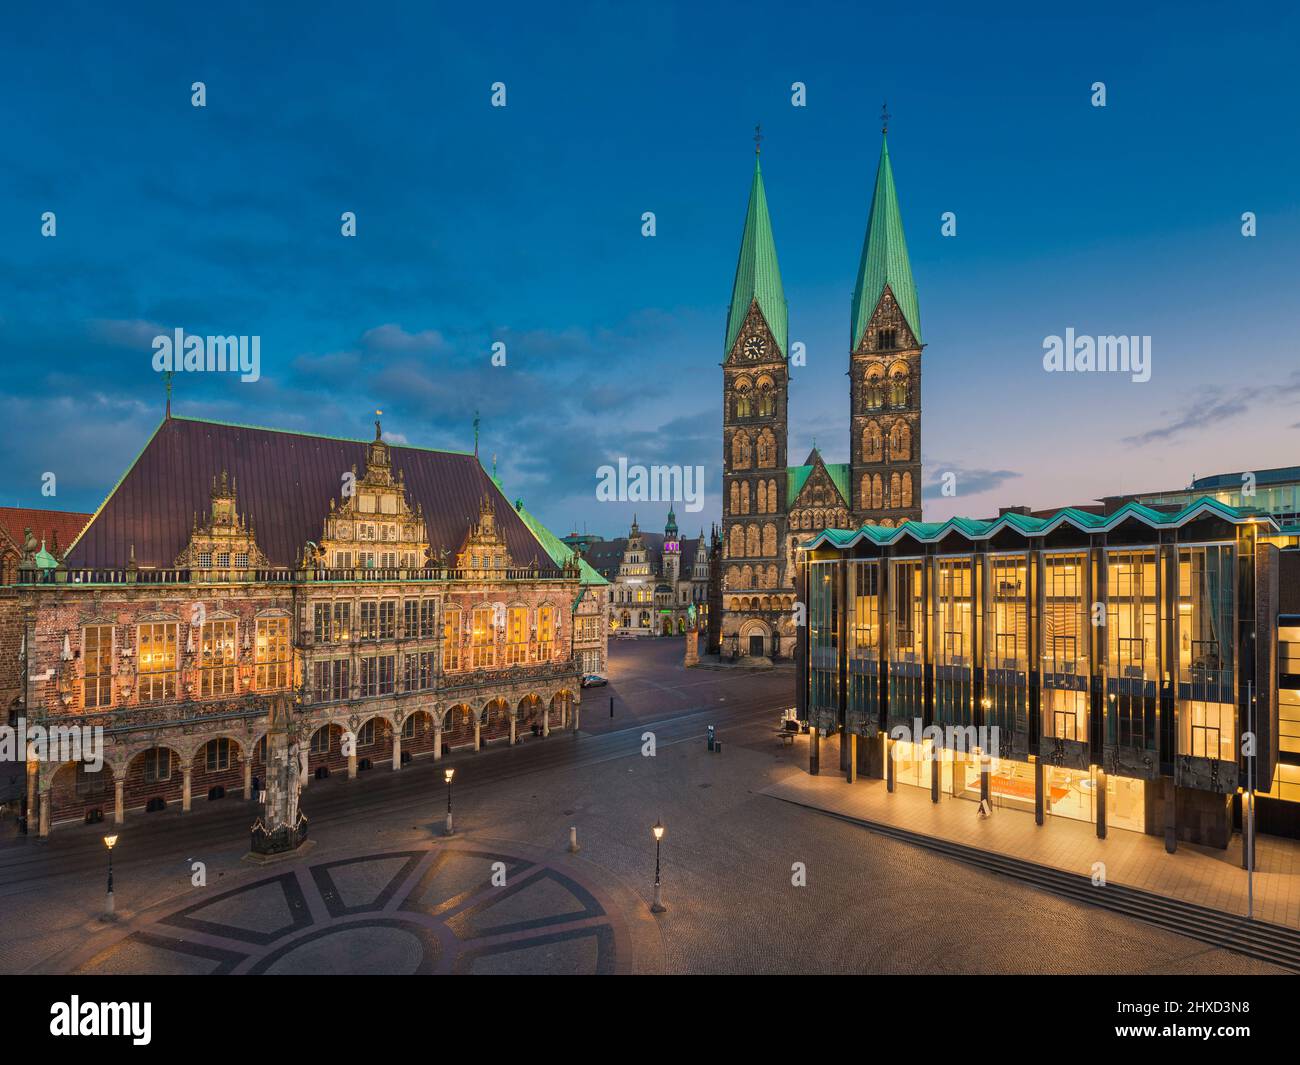 Market square of Bremen, Germany at night Stock Photo